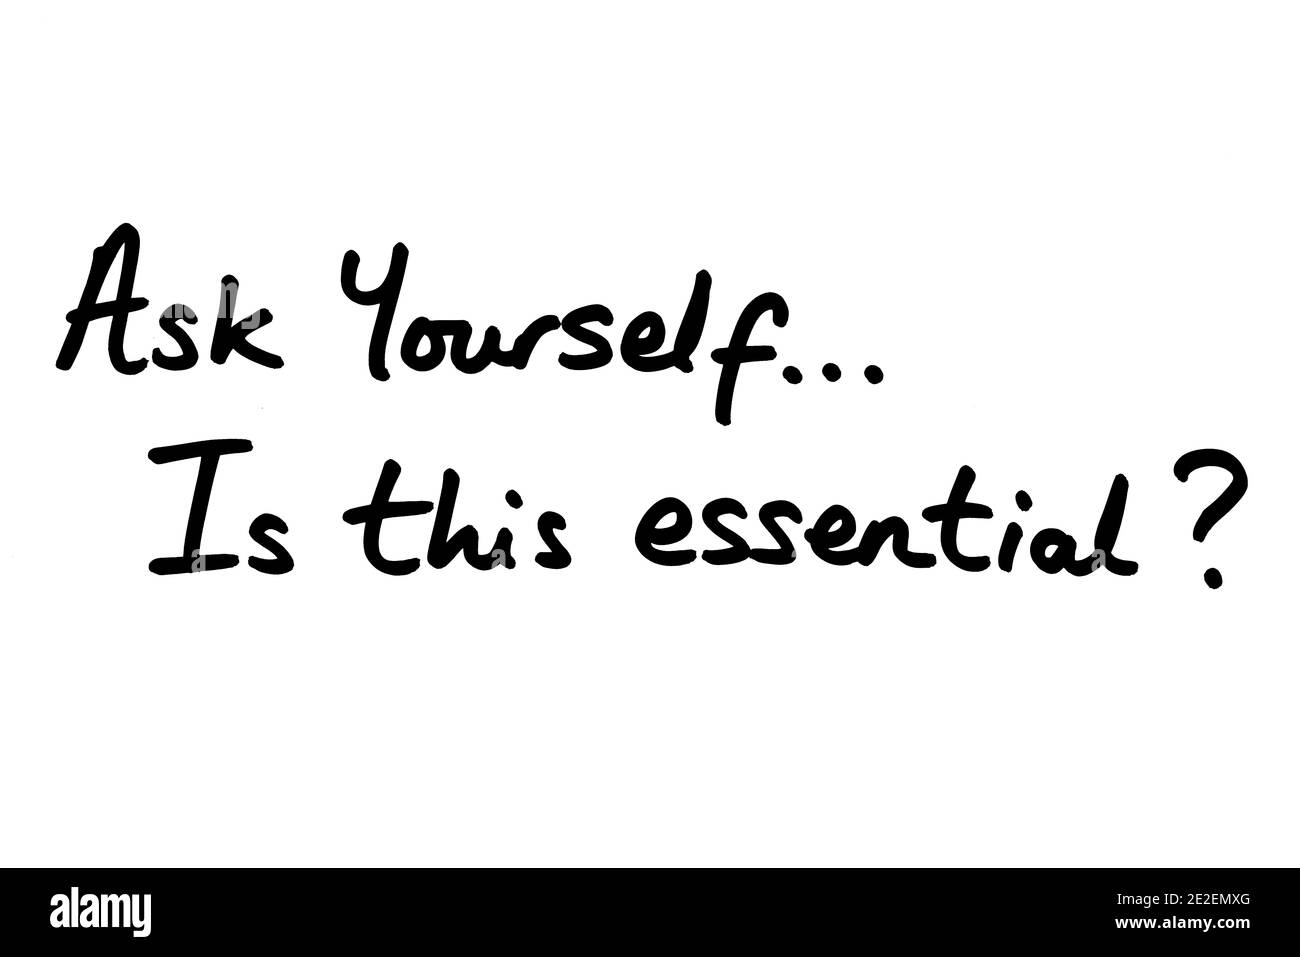 Ask Yourself..is this essential? handwritten on a white background. Stock Photo